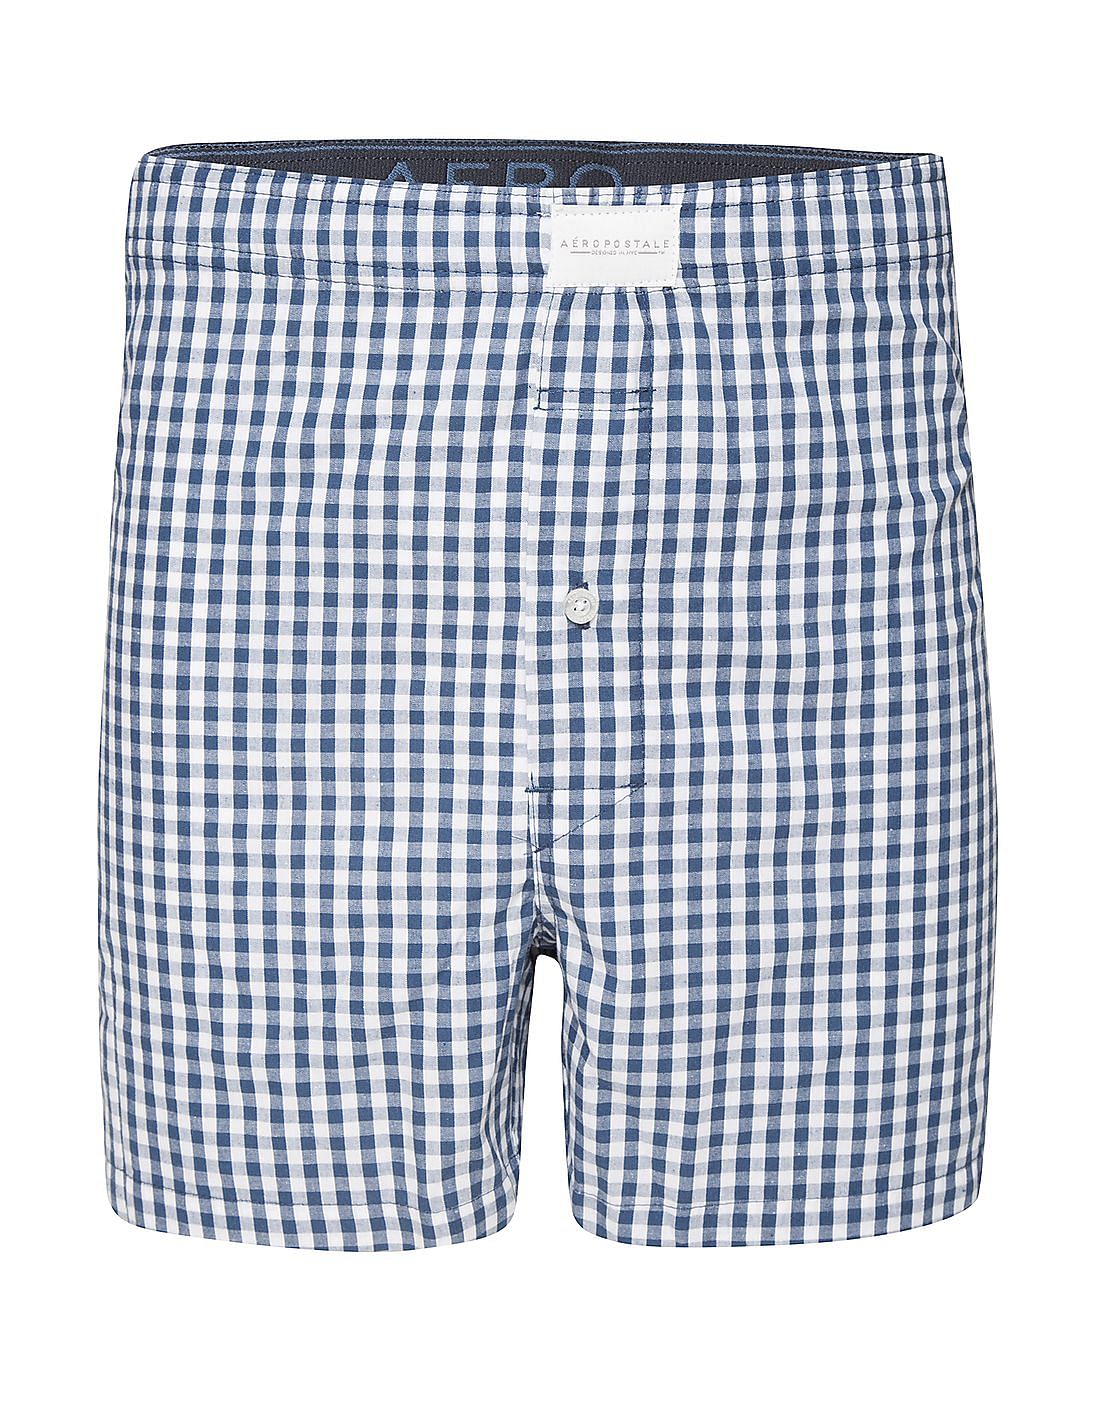 Buy Aeropostale Woven Gingham Boxers - NNNOW.com